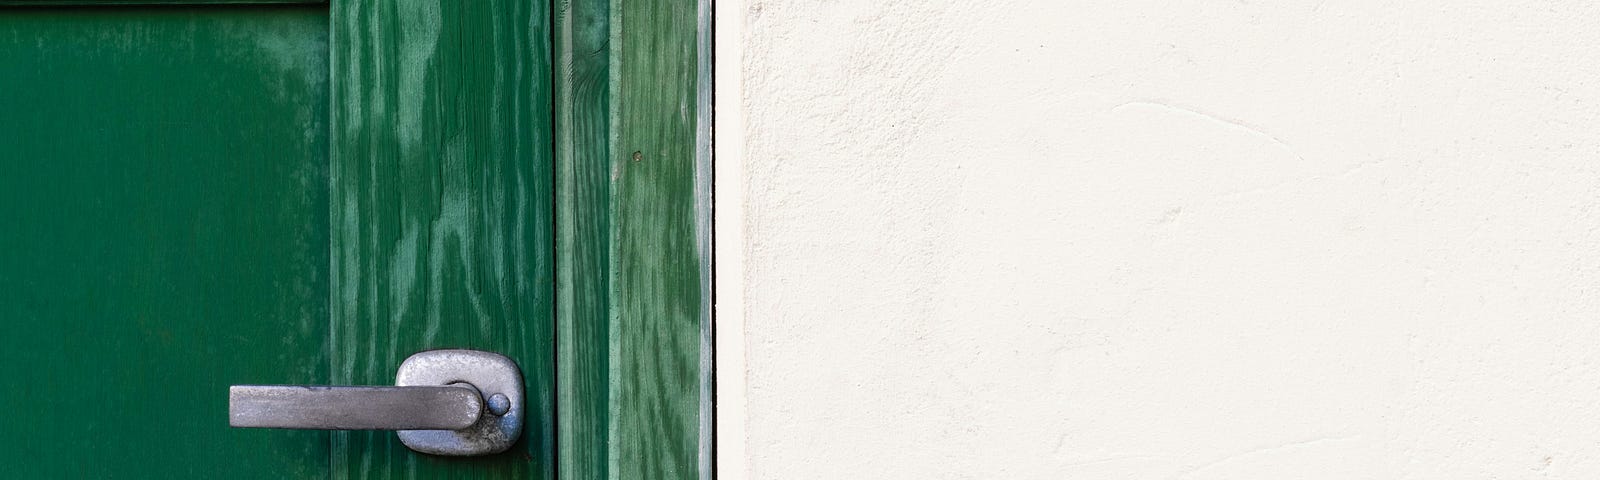 An outdoor photo of half a painted green door with handle and lock, next to the white siding of the house.